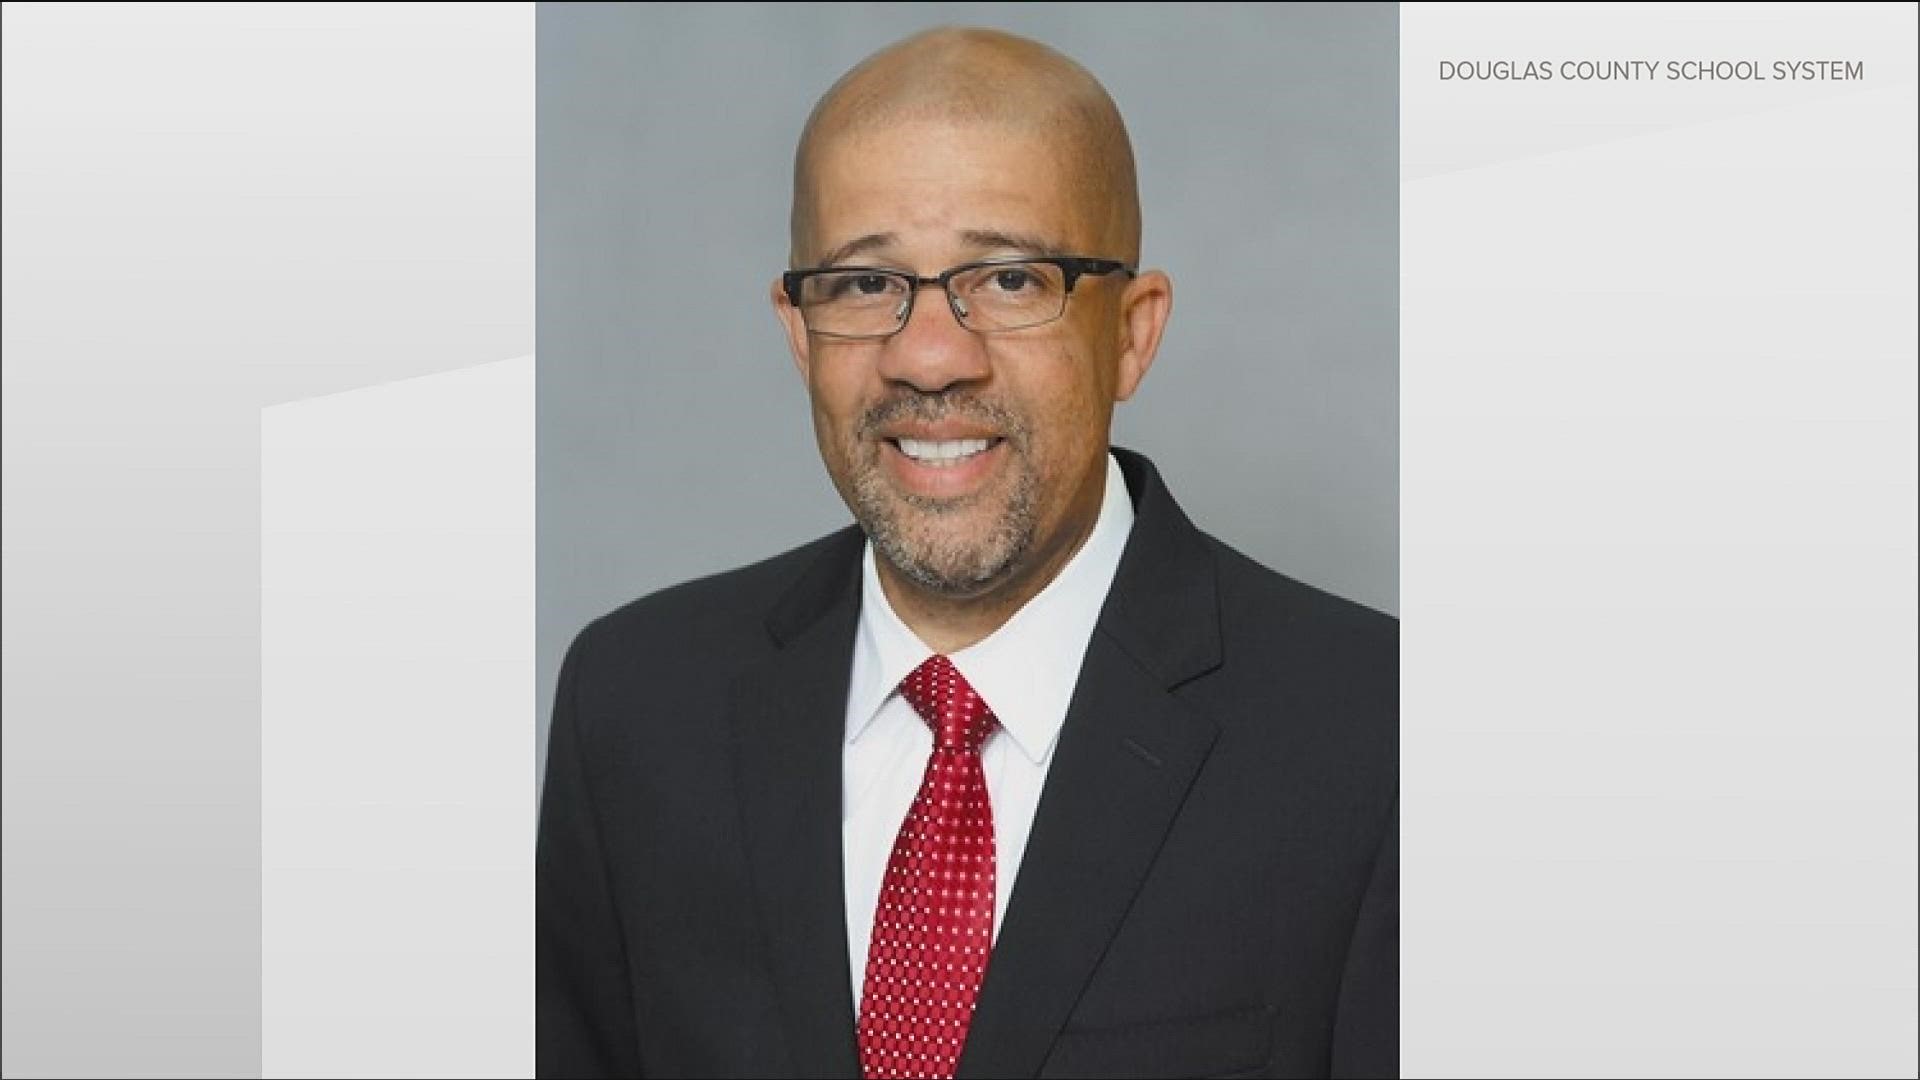 Douglas County School System's superintendent, Trent North, has been named Georgia's 2023 Superintendent of the Year.